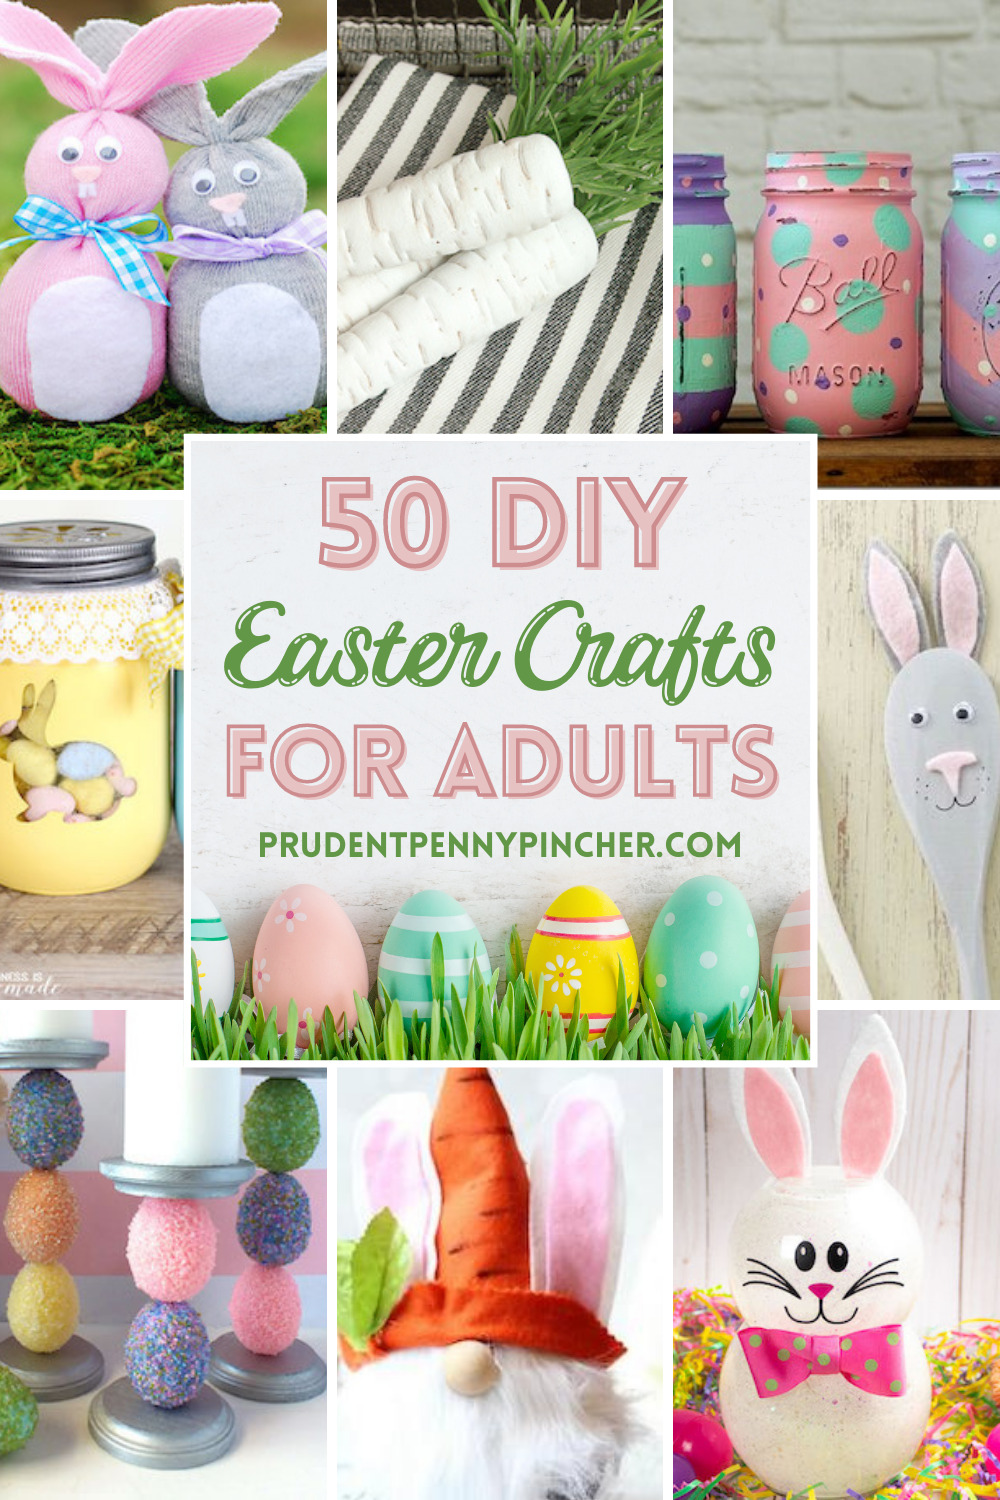 60 DIY Easter Crafts For Adults Prudent Penny Pincher